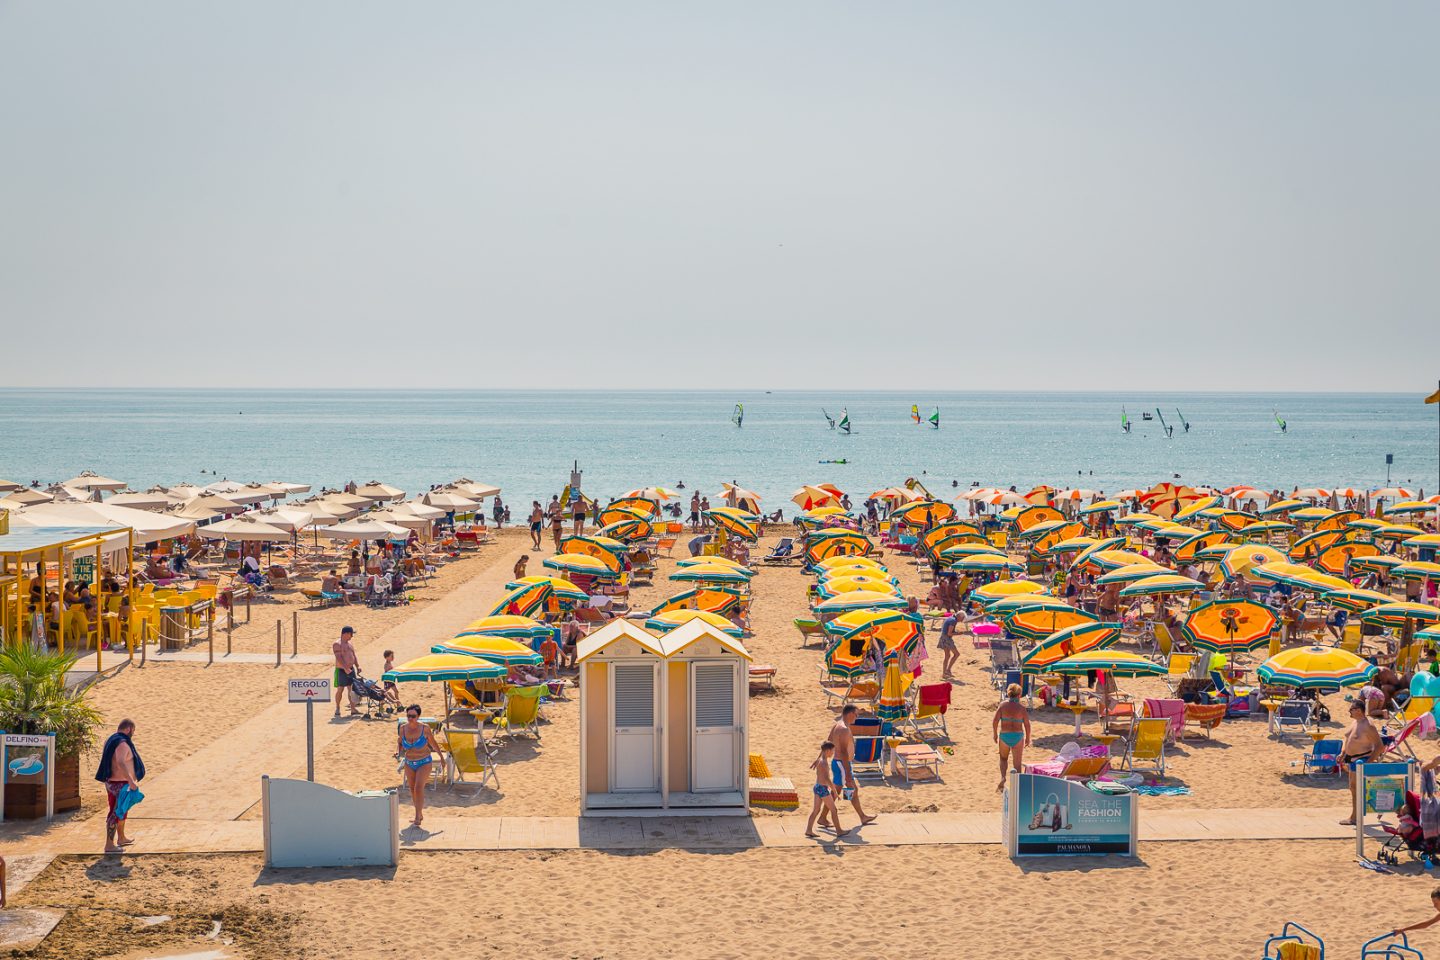 The beach of Bibione: services, comfort and clean sea